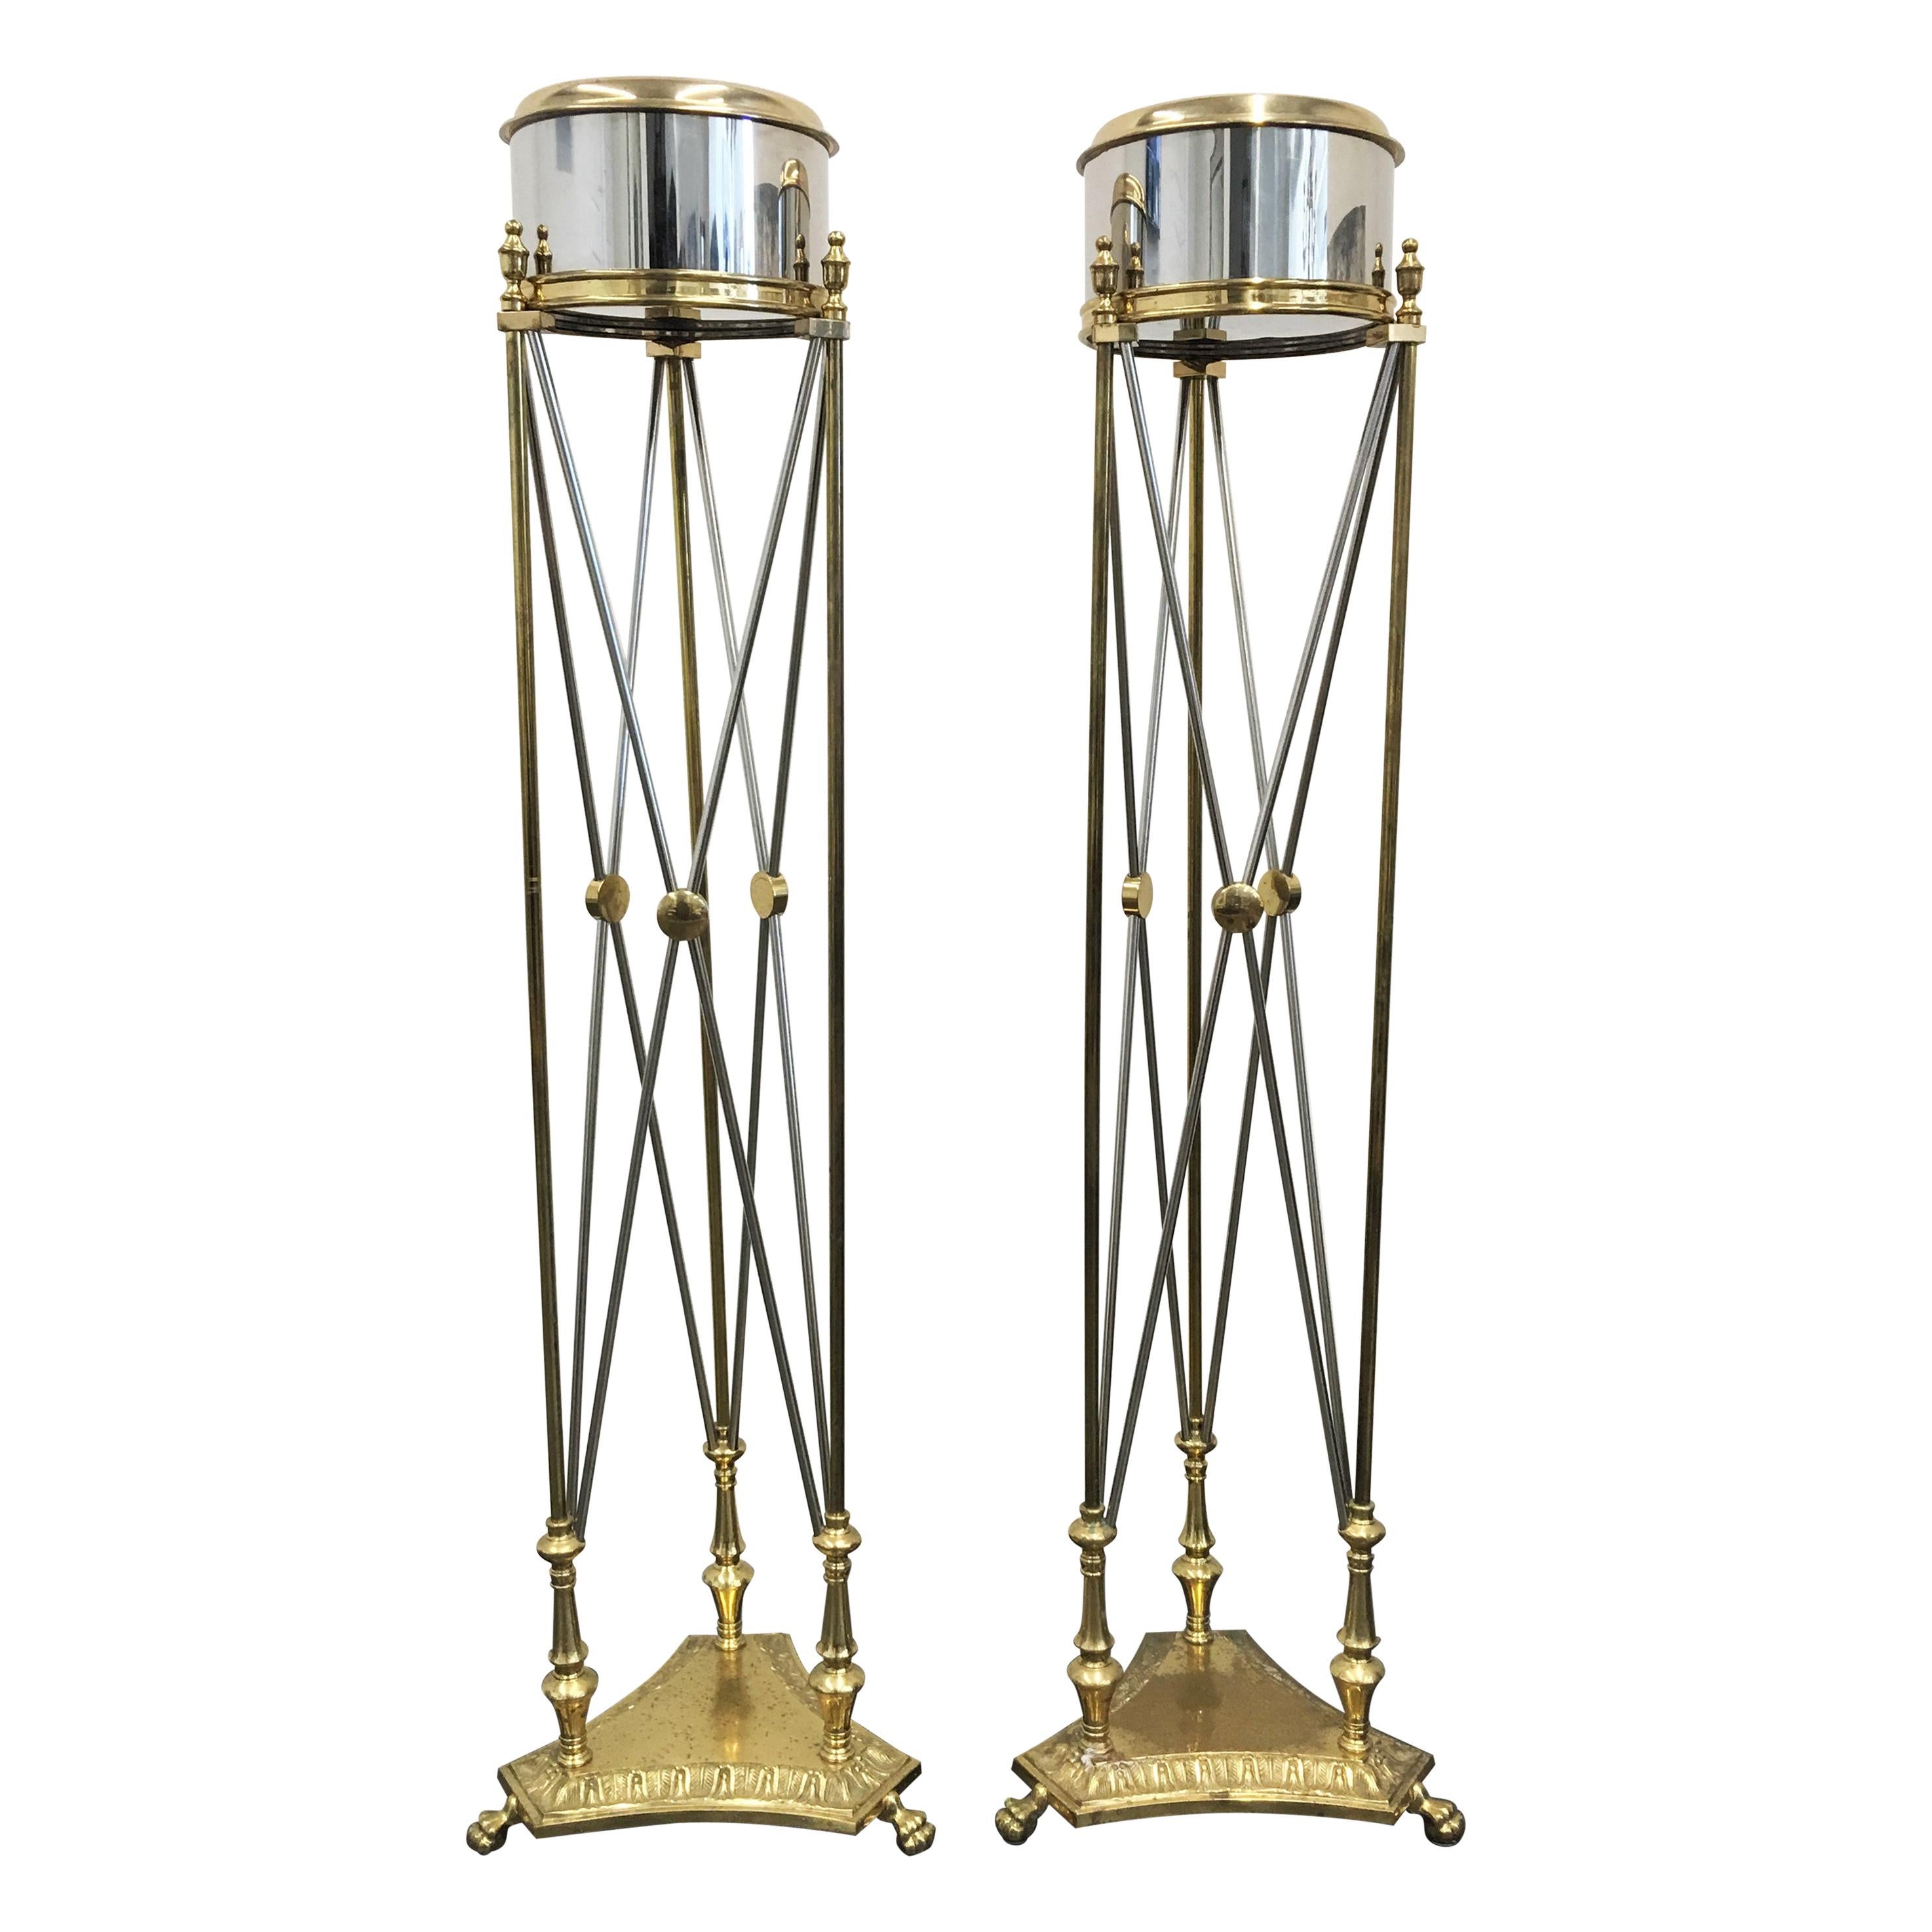 Pair of Maison Jansen Style Steel and Brass Jardinière / Planter Stands